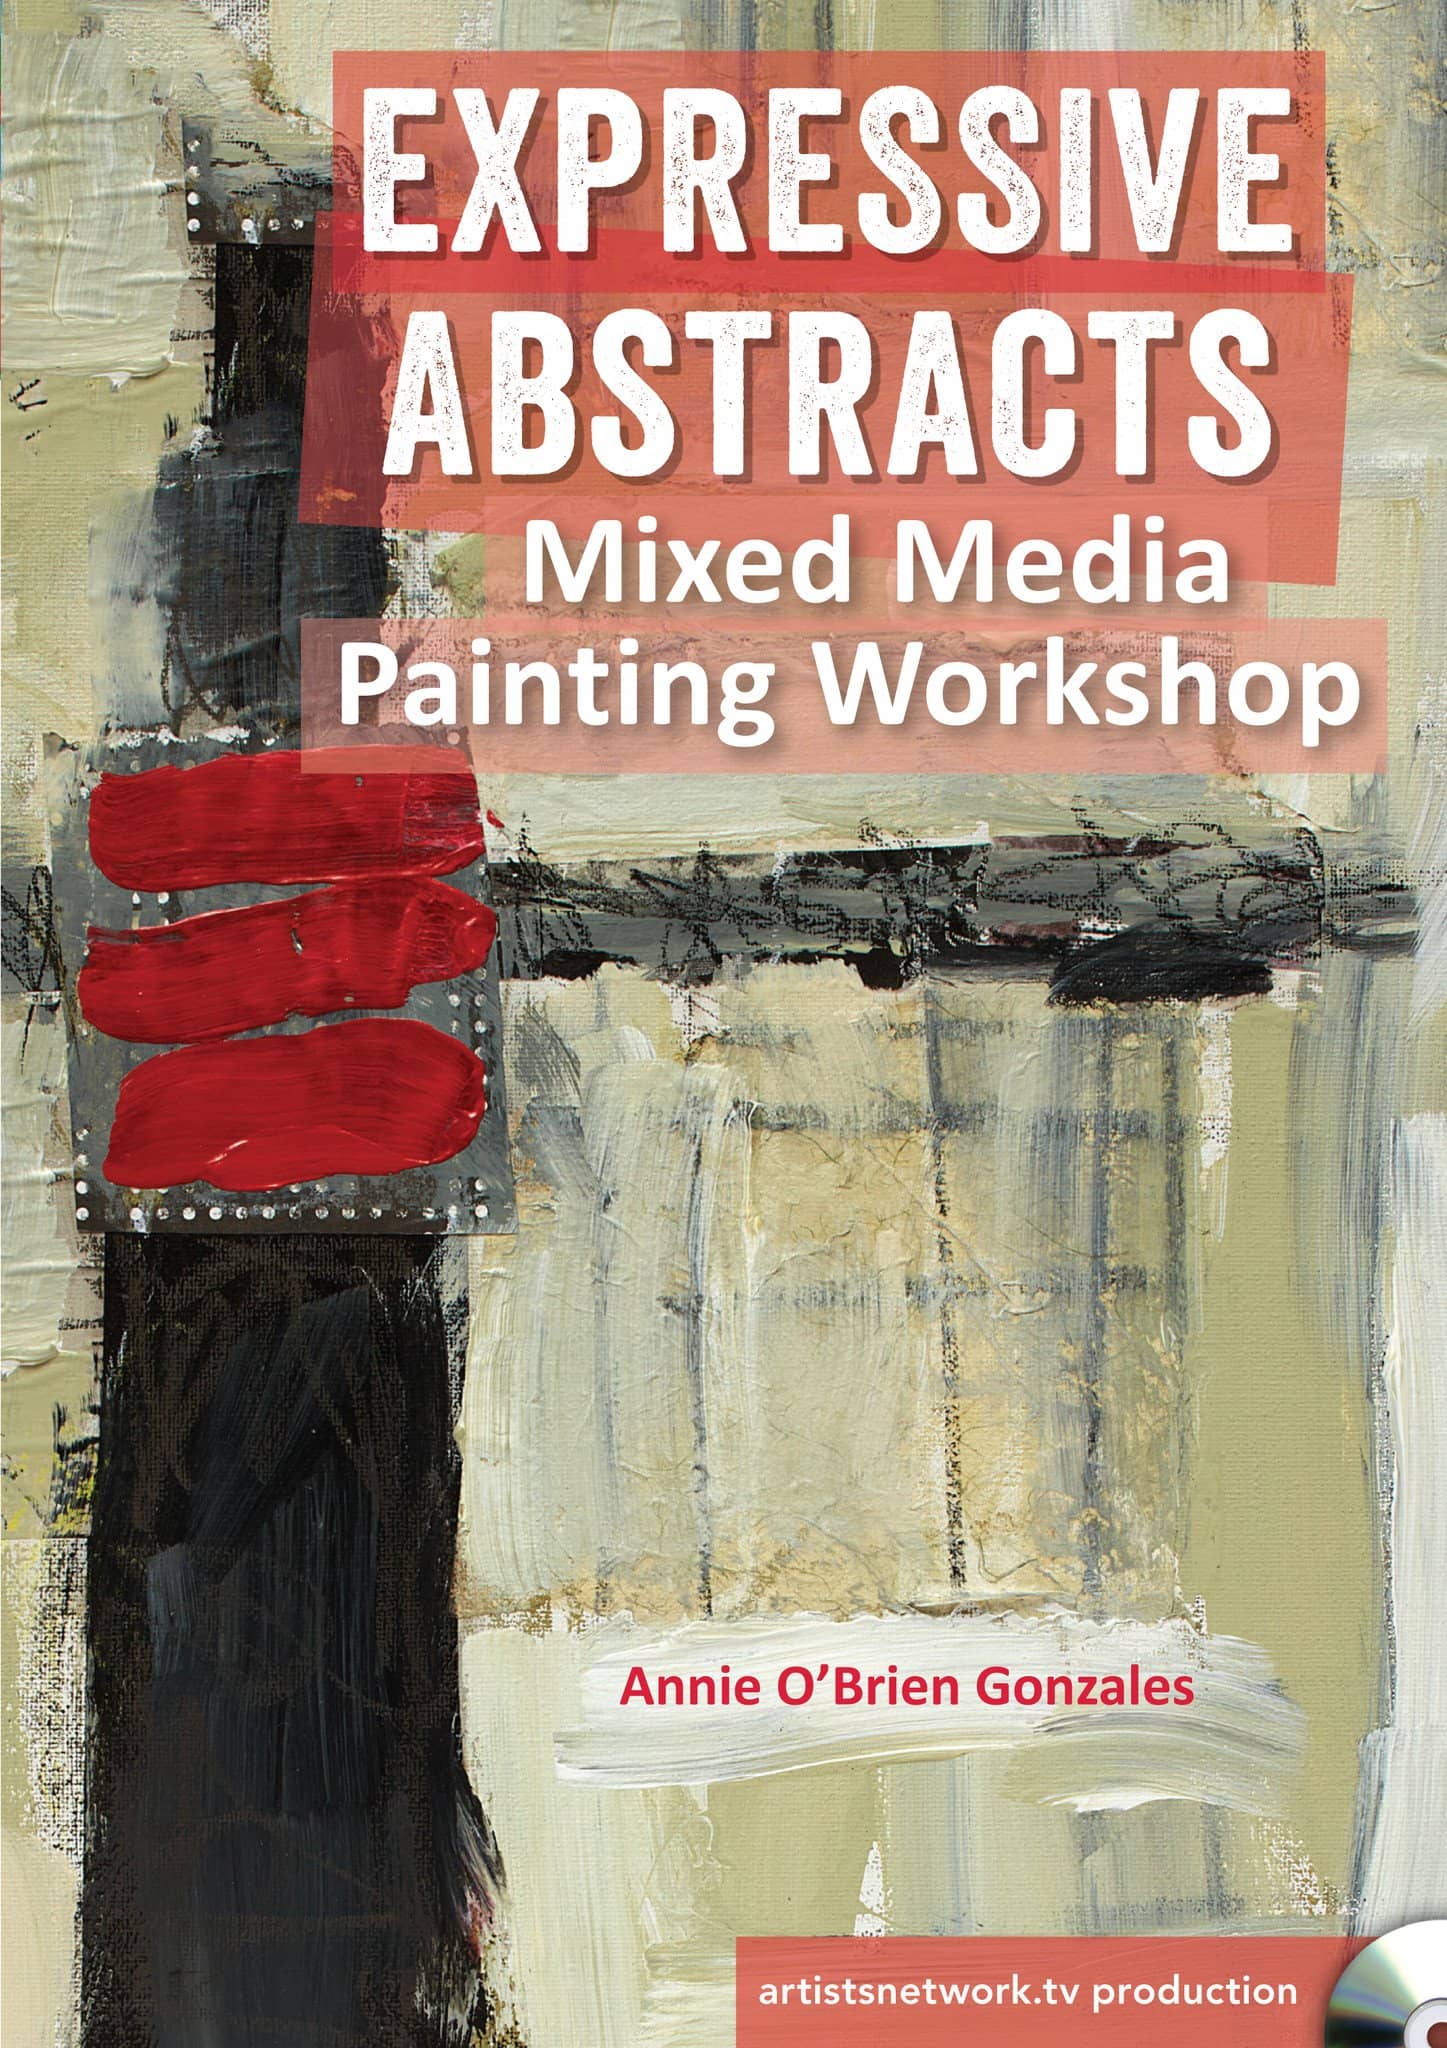 Annie O'Brien Gonzales: Expressive Abstracts Mixed Media Painting Workshop